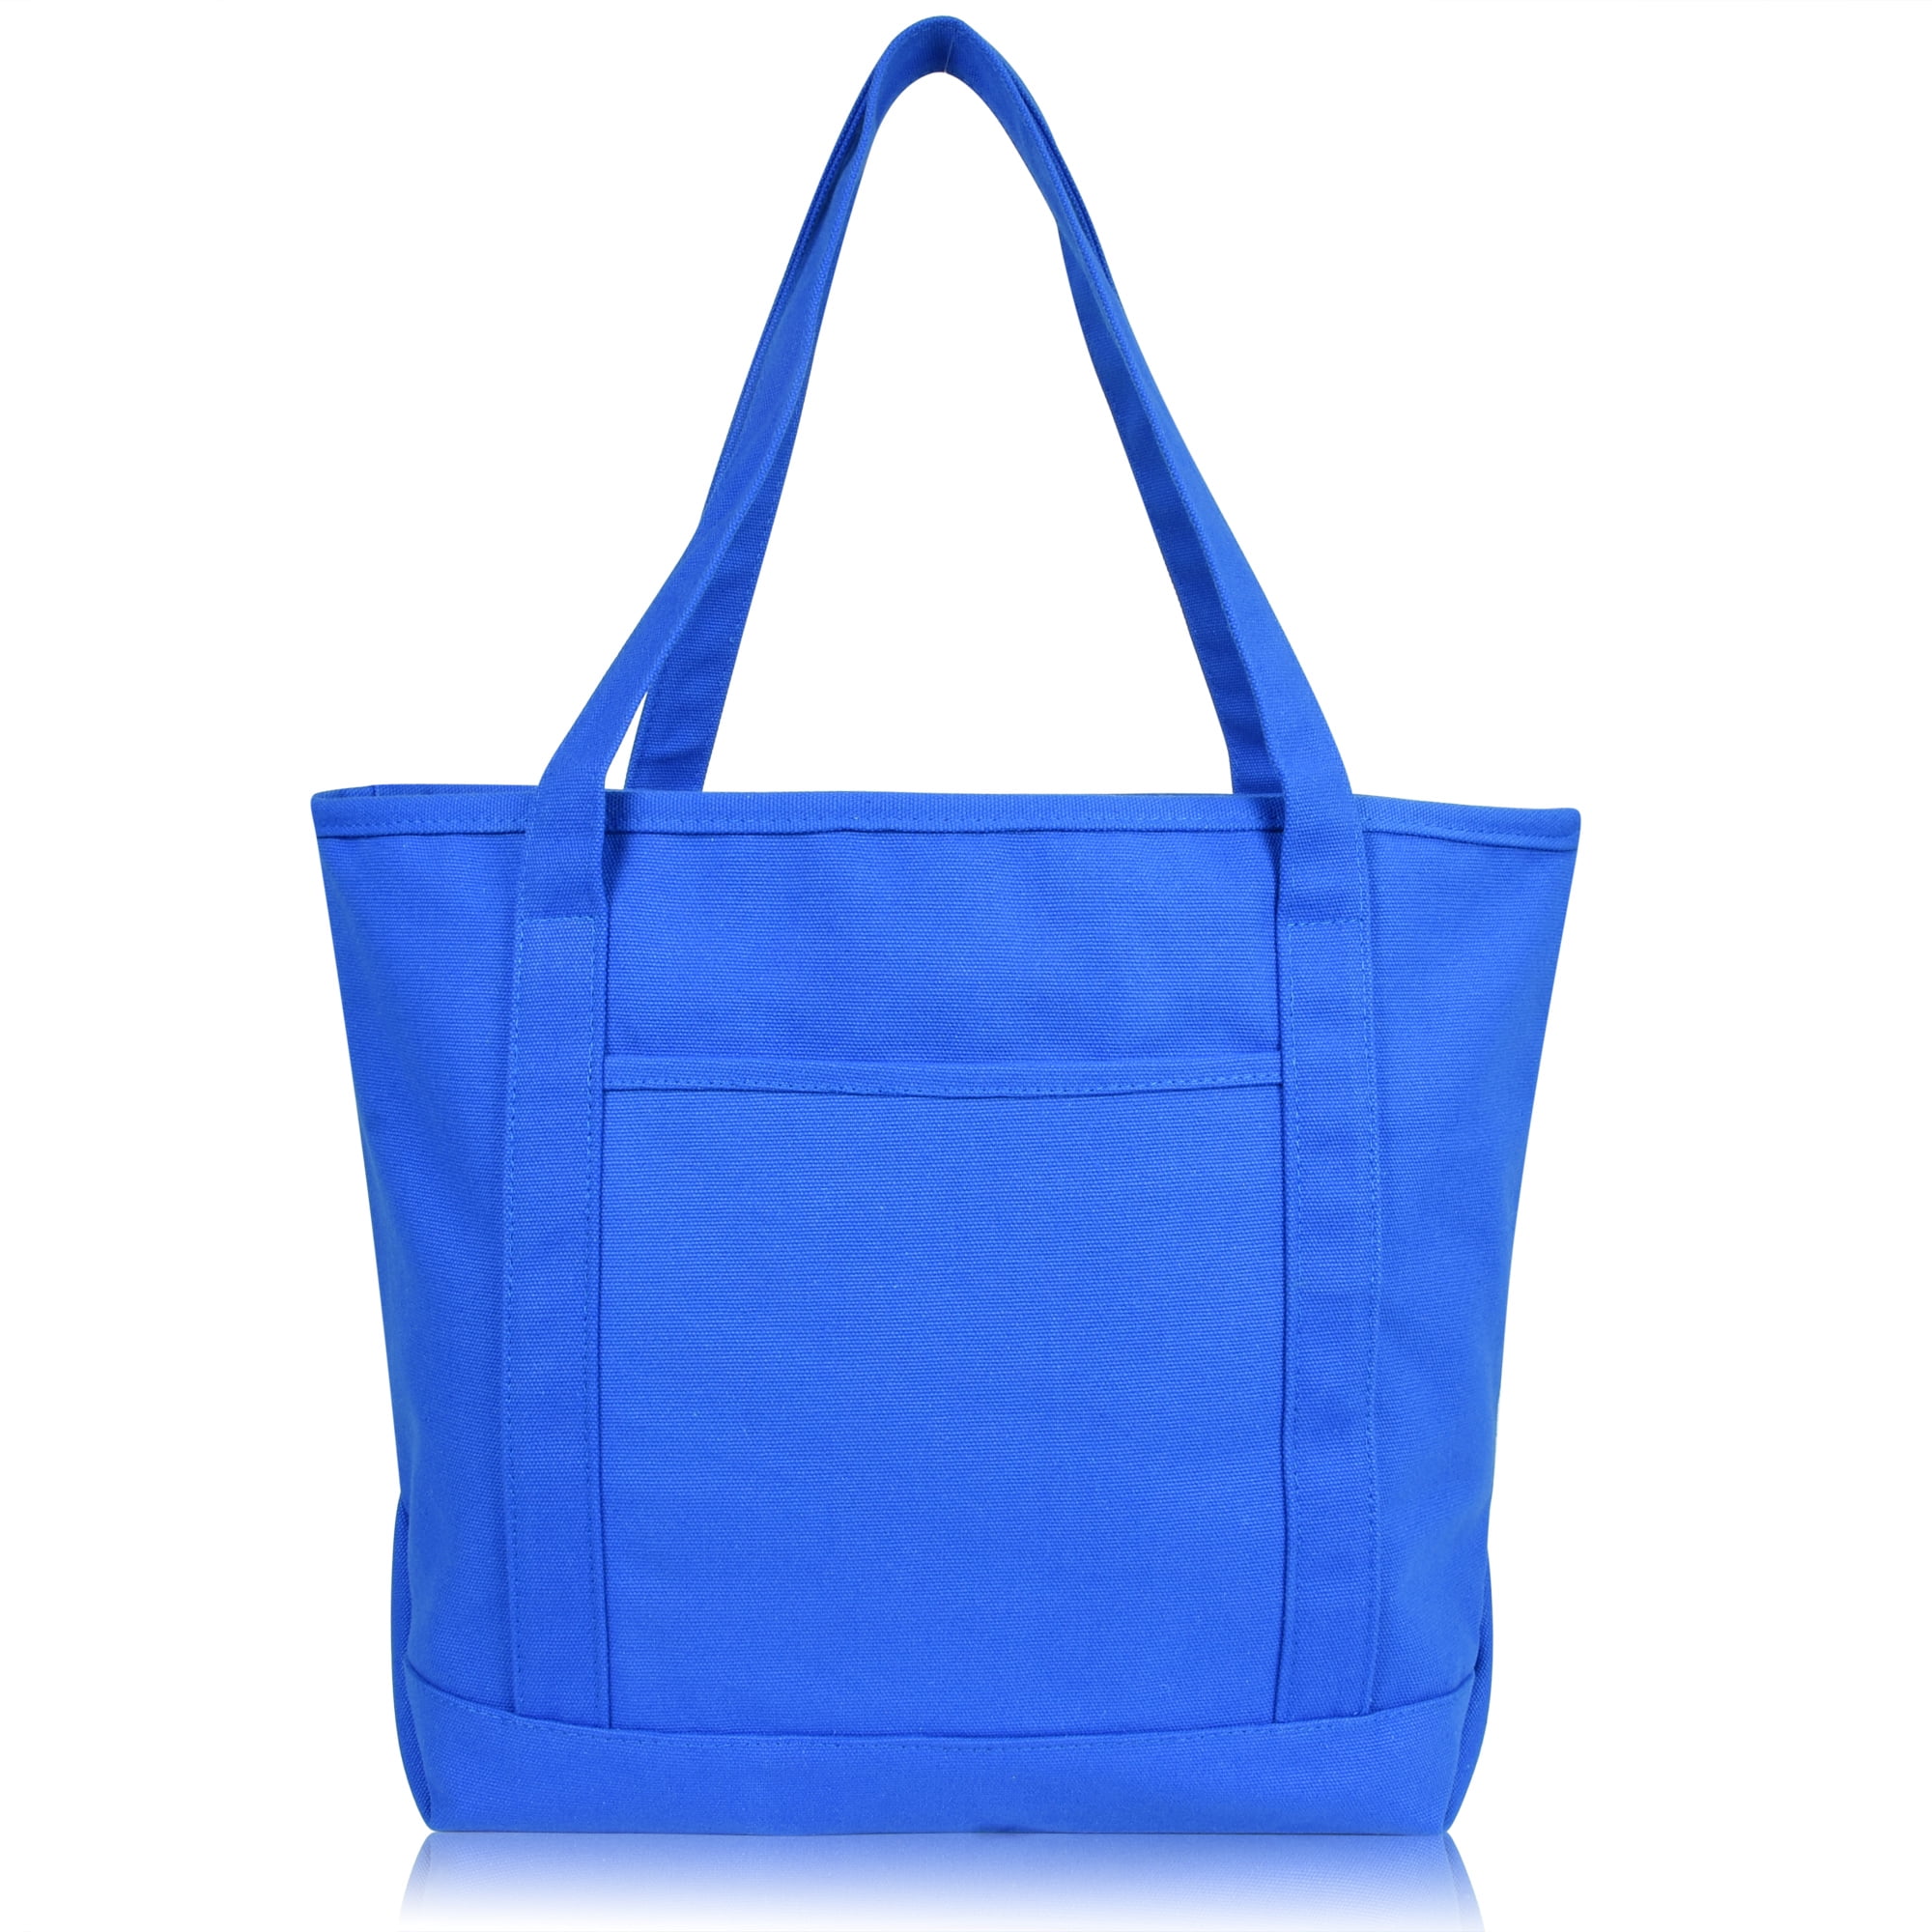 Prime Line Packaging- Cotton Canvas Shopping Tote Bags with Handles 20 Pack 14.5x15.75x3.5, Adult Unisex, Blue